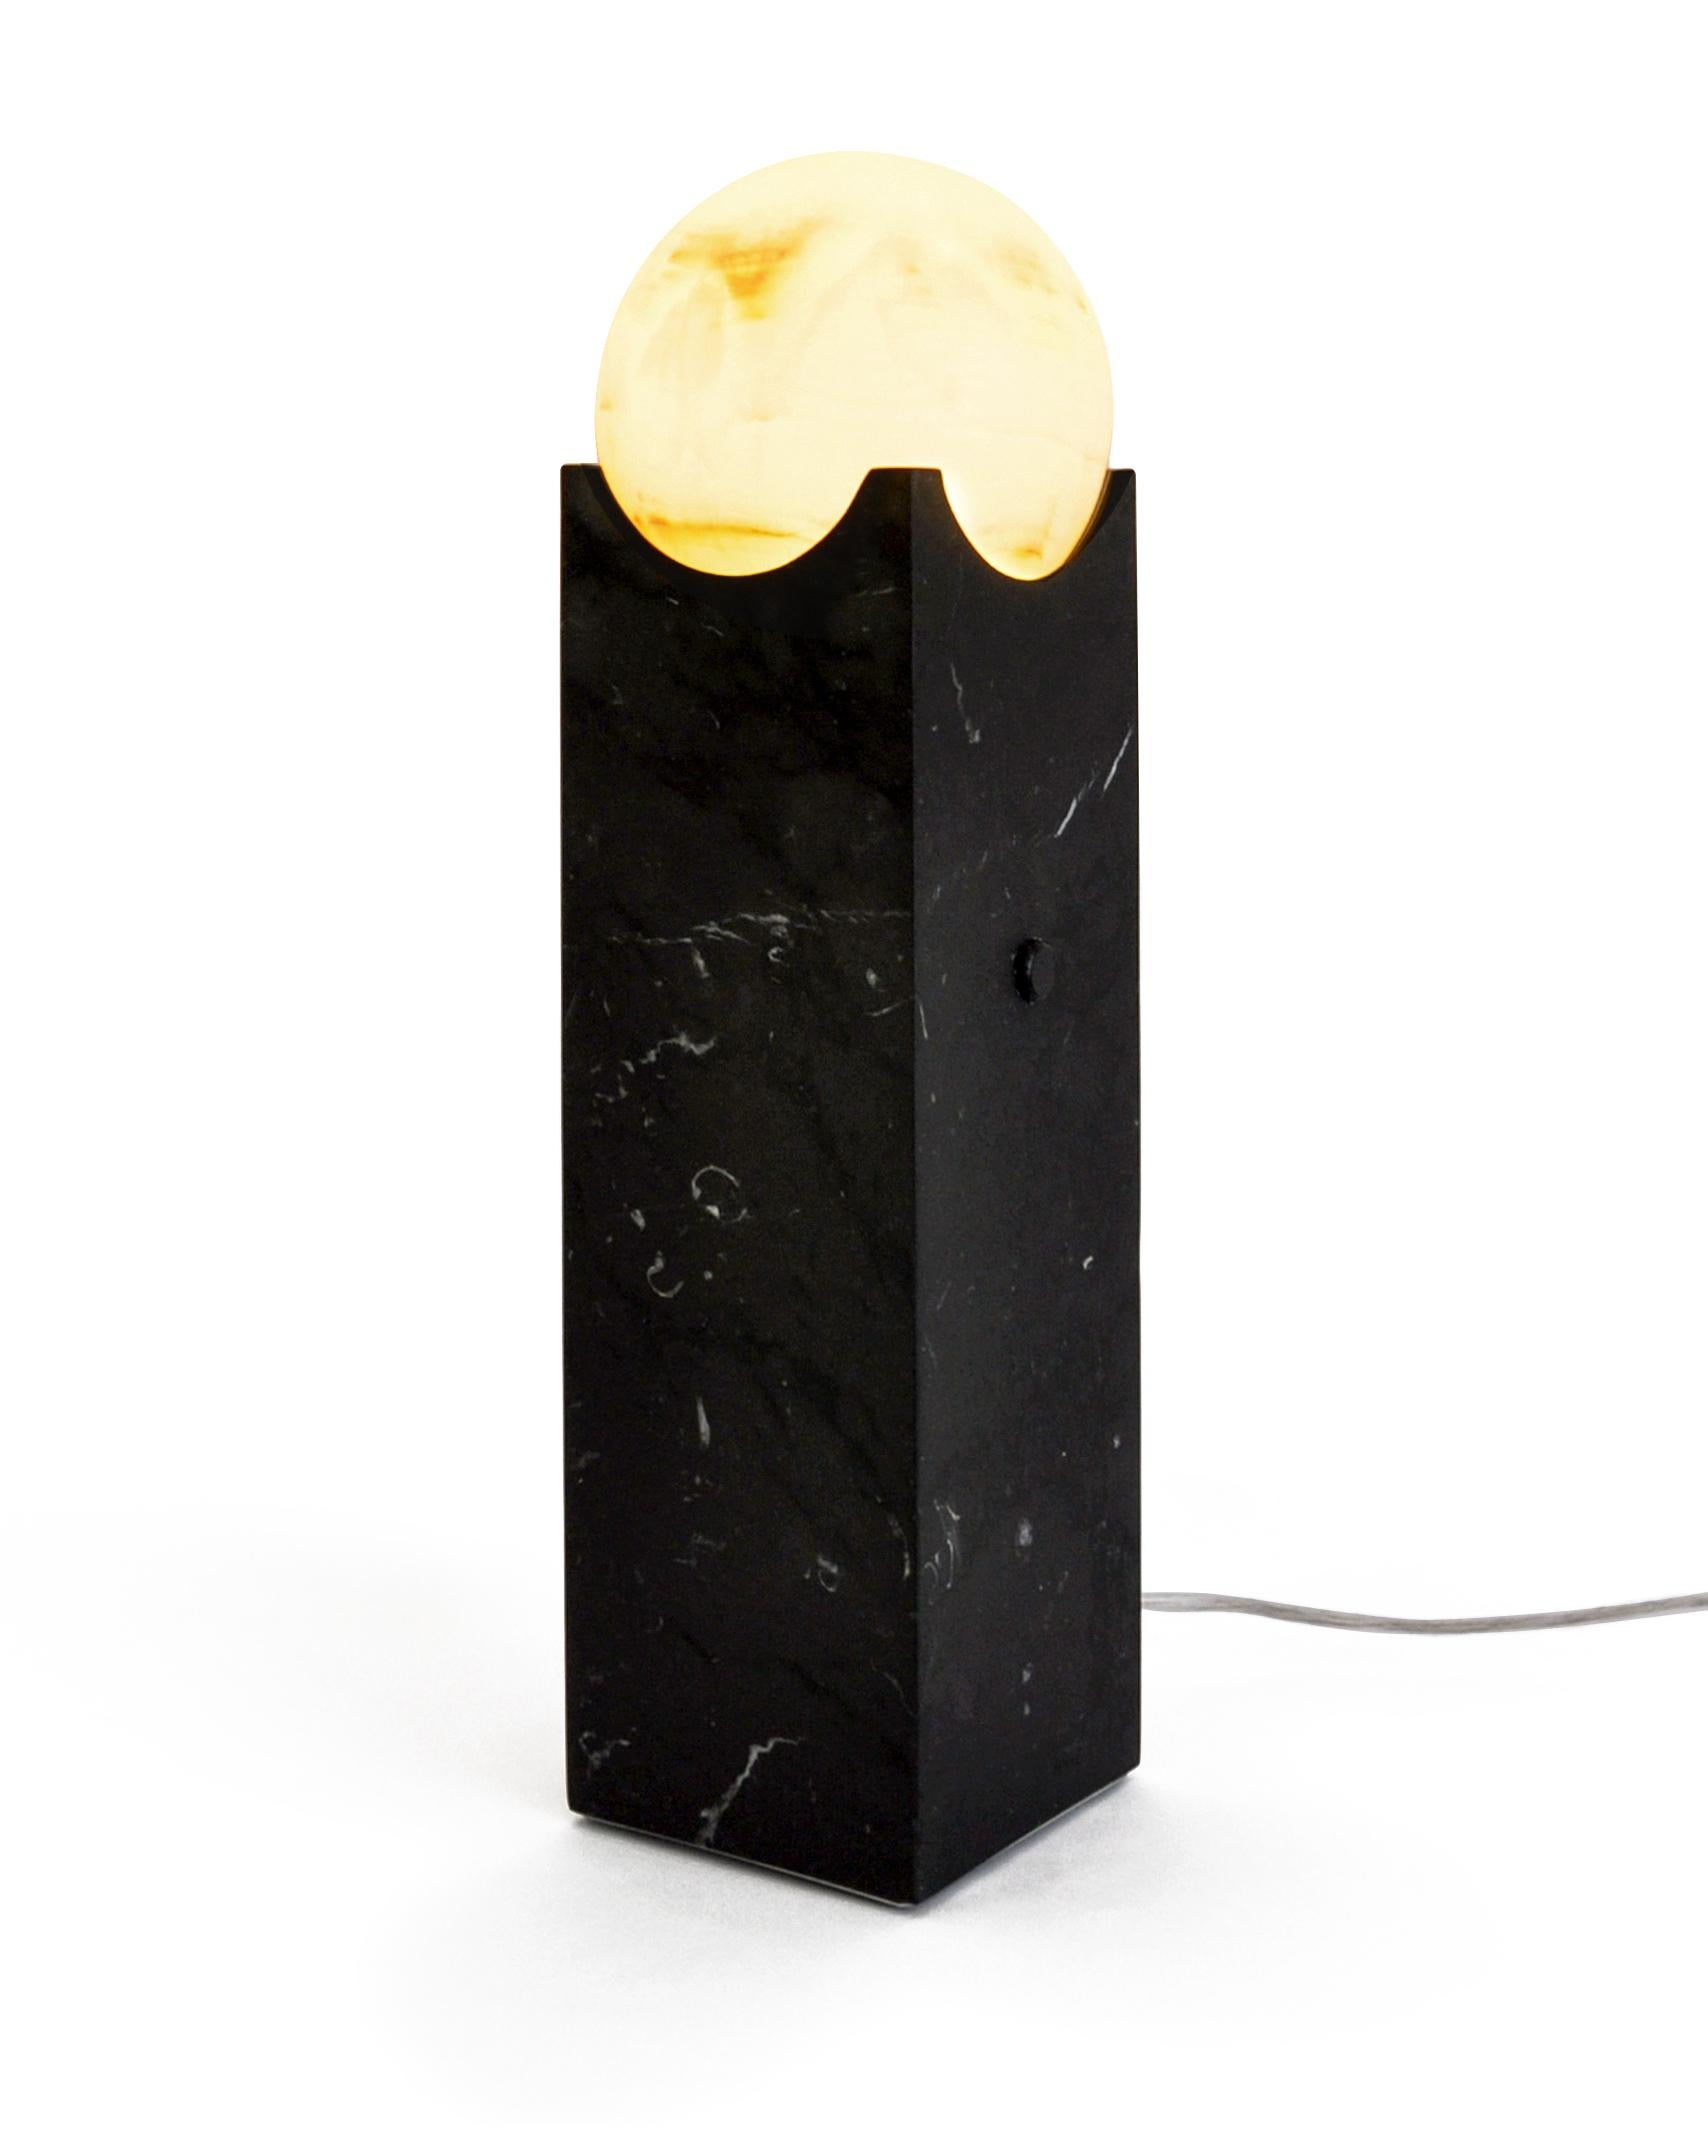 Big eclipse lamp in satin Paonazzo or black Marquina marble. It gives a distinct and elegant touch to your house.

Each piece is in a way unique (every marble block is different in veins and shades) and handmade by Italian artisans specialized over